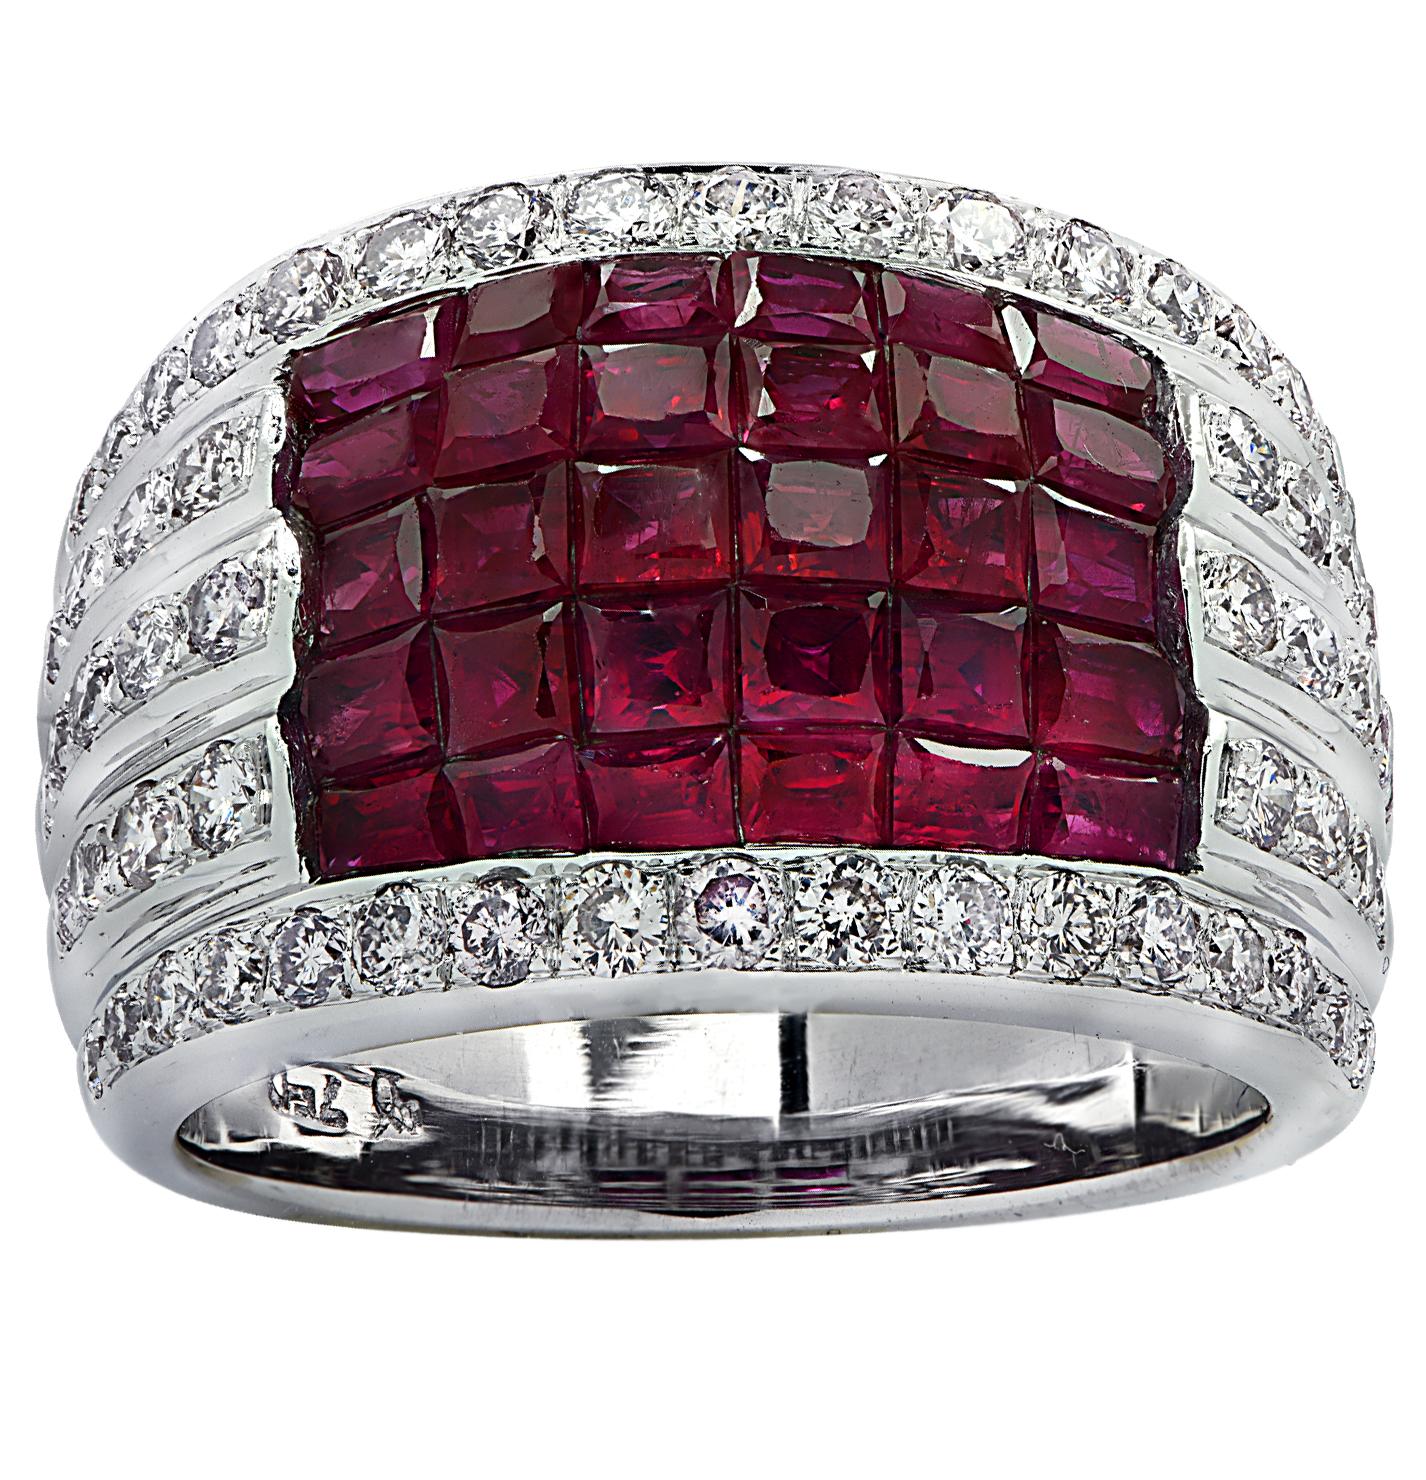 Stunning ruby and diamond ring crafted in 18 karat white gold, featuring 60 round brilliant cut diamonds weighing approximately 1.20 carats total, G-H color VS-SI clarity, and 30 square step cut rubies weighing approximately 2.40 carats total. The